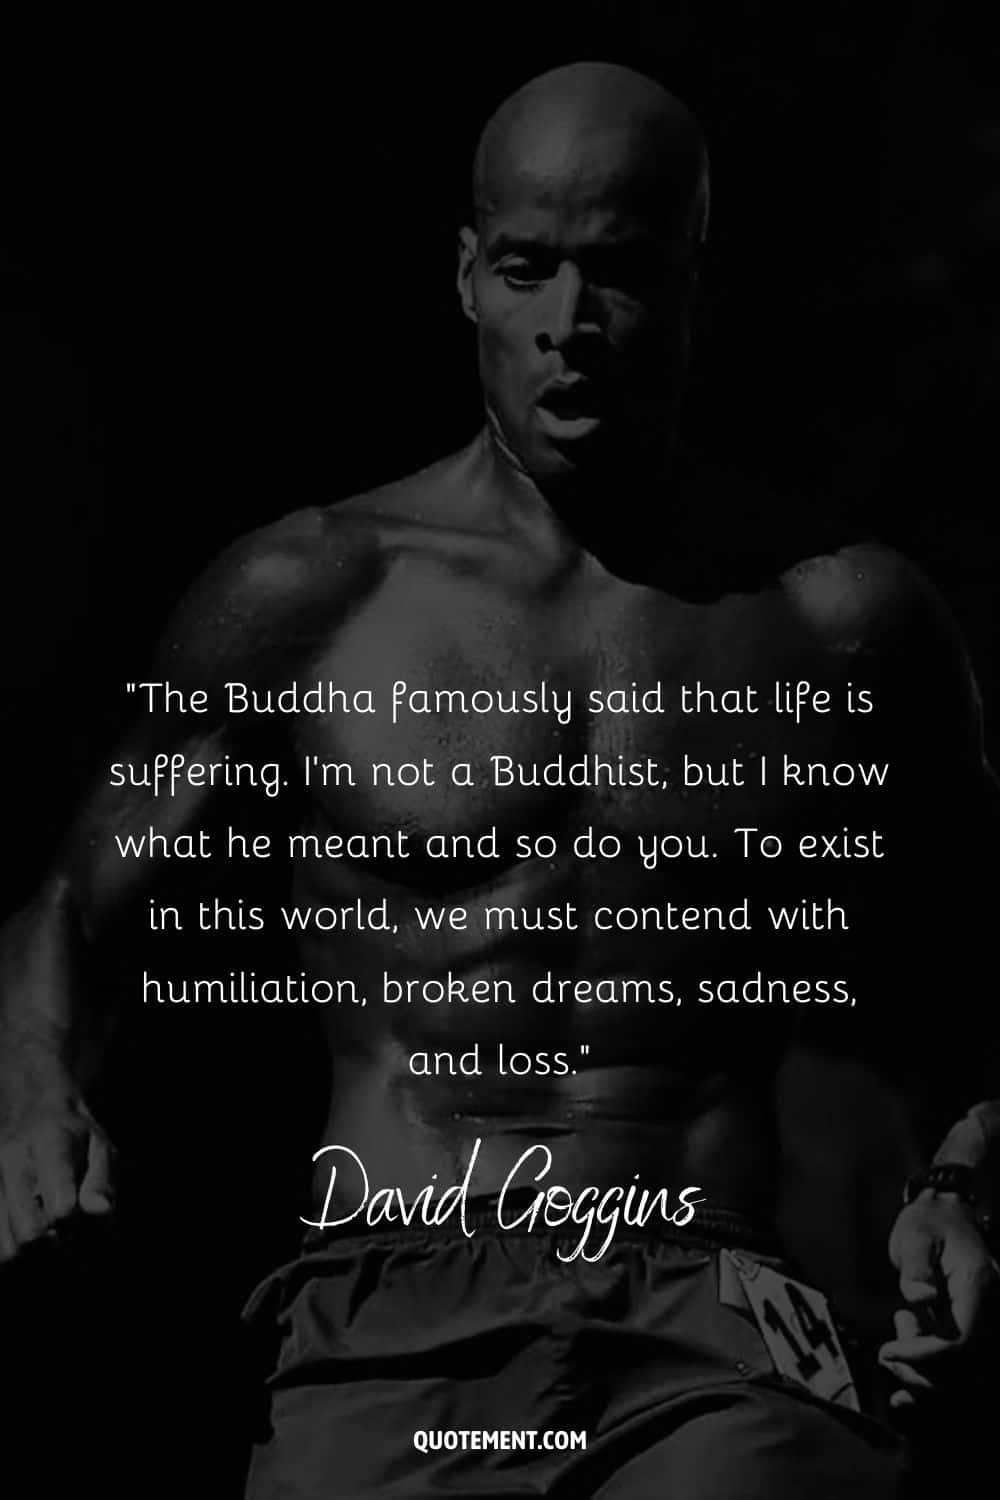 Quote by David Goggins and his photo in the background